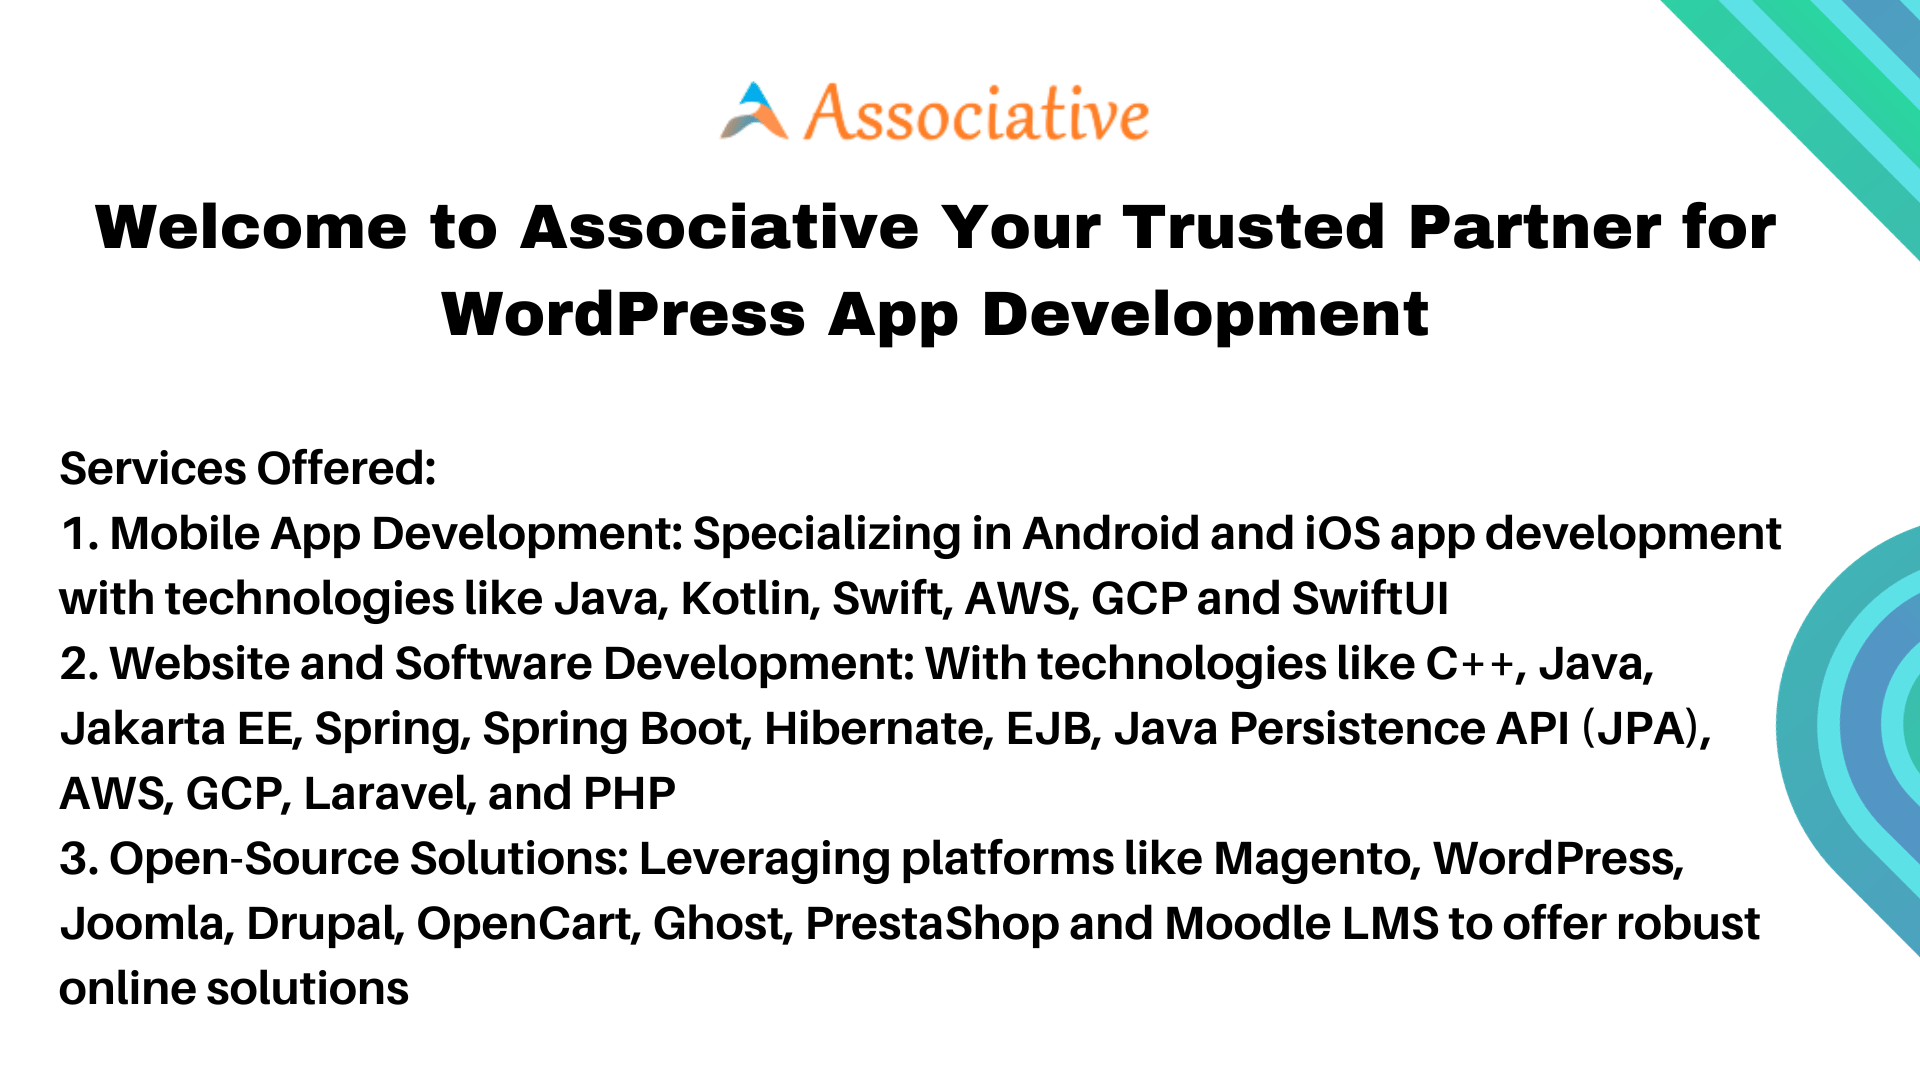 Welcome to Associative Your Trusted Partner for WordPress App Development